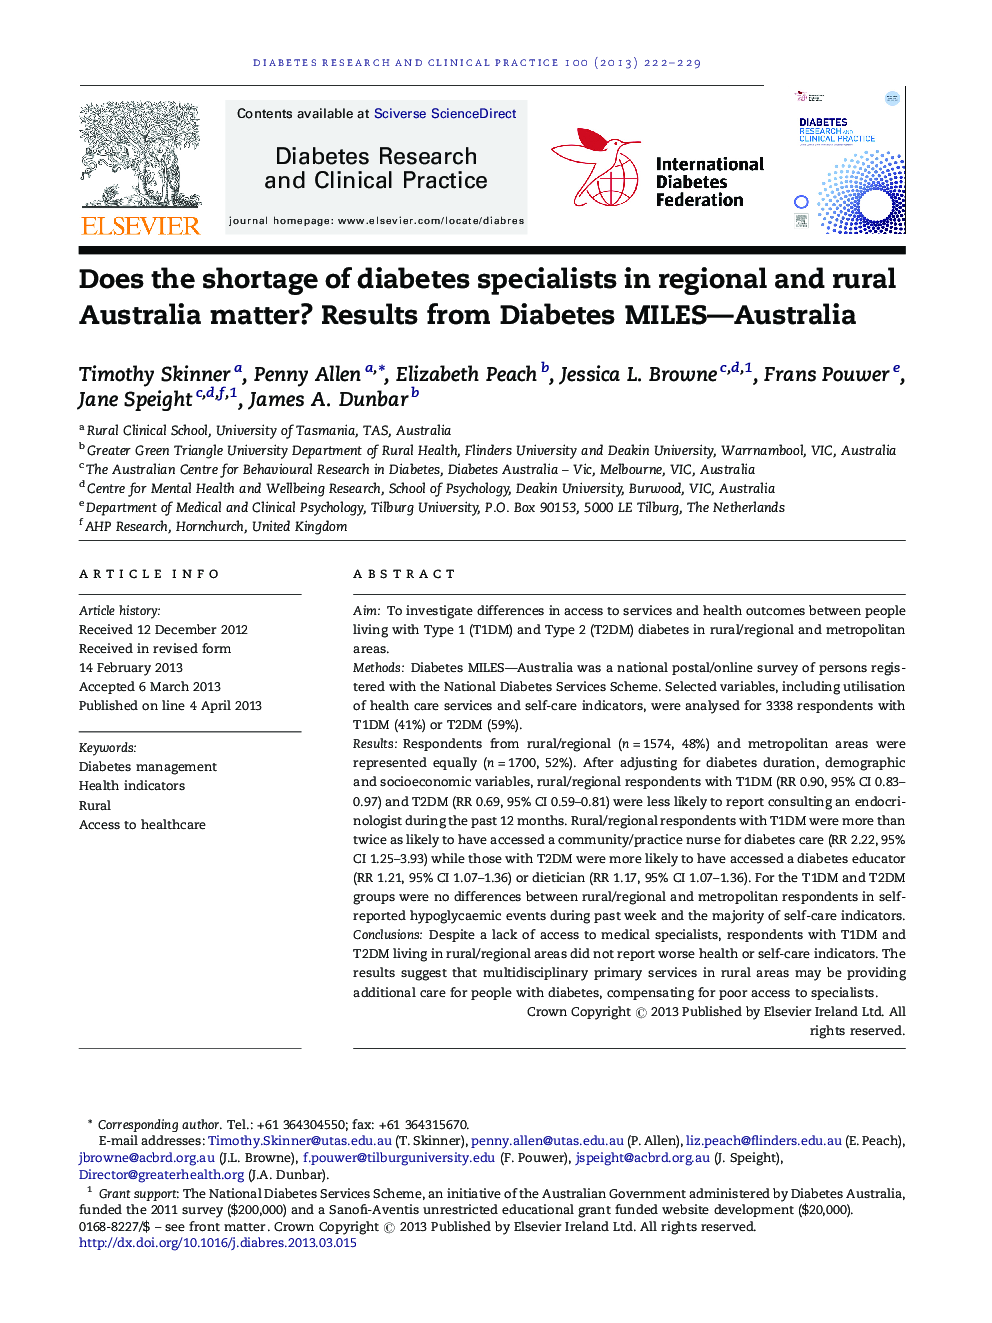 Does the shortage of diabetes specialists in regional and rural Australia matter? Results from Diabetes MILES—Australia